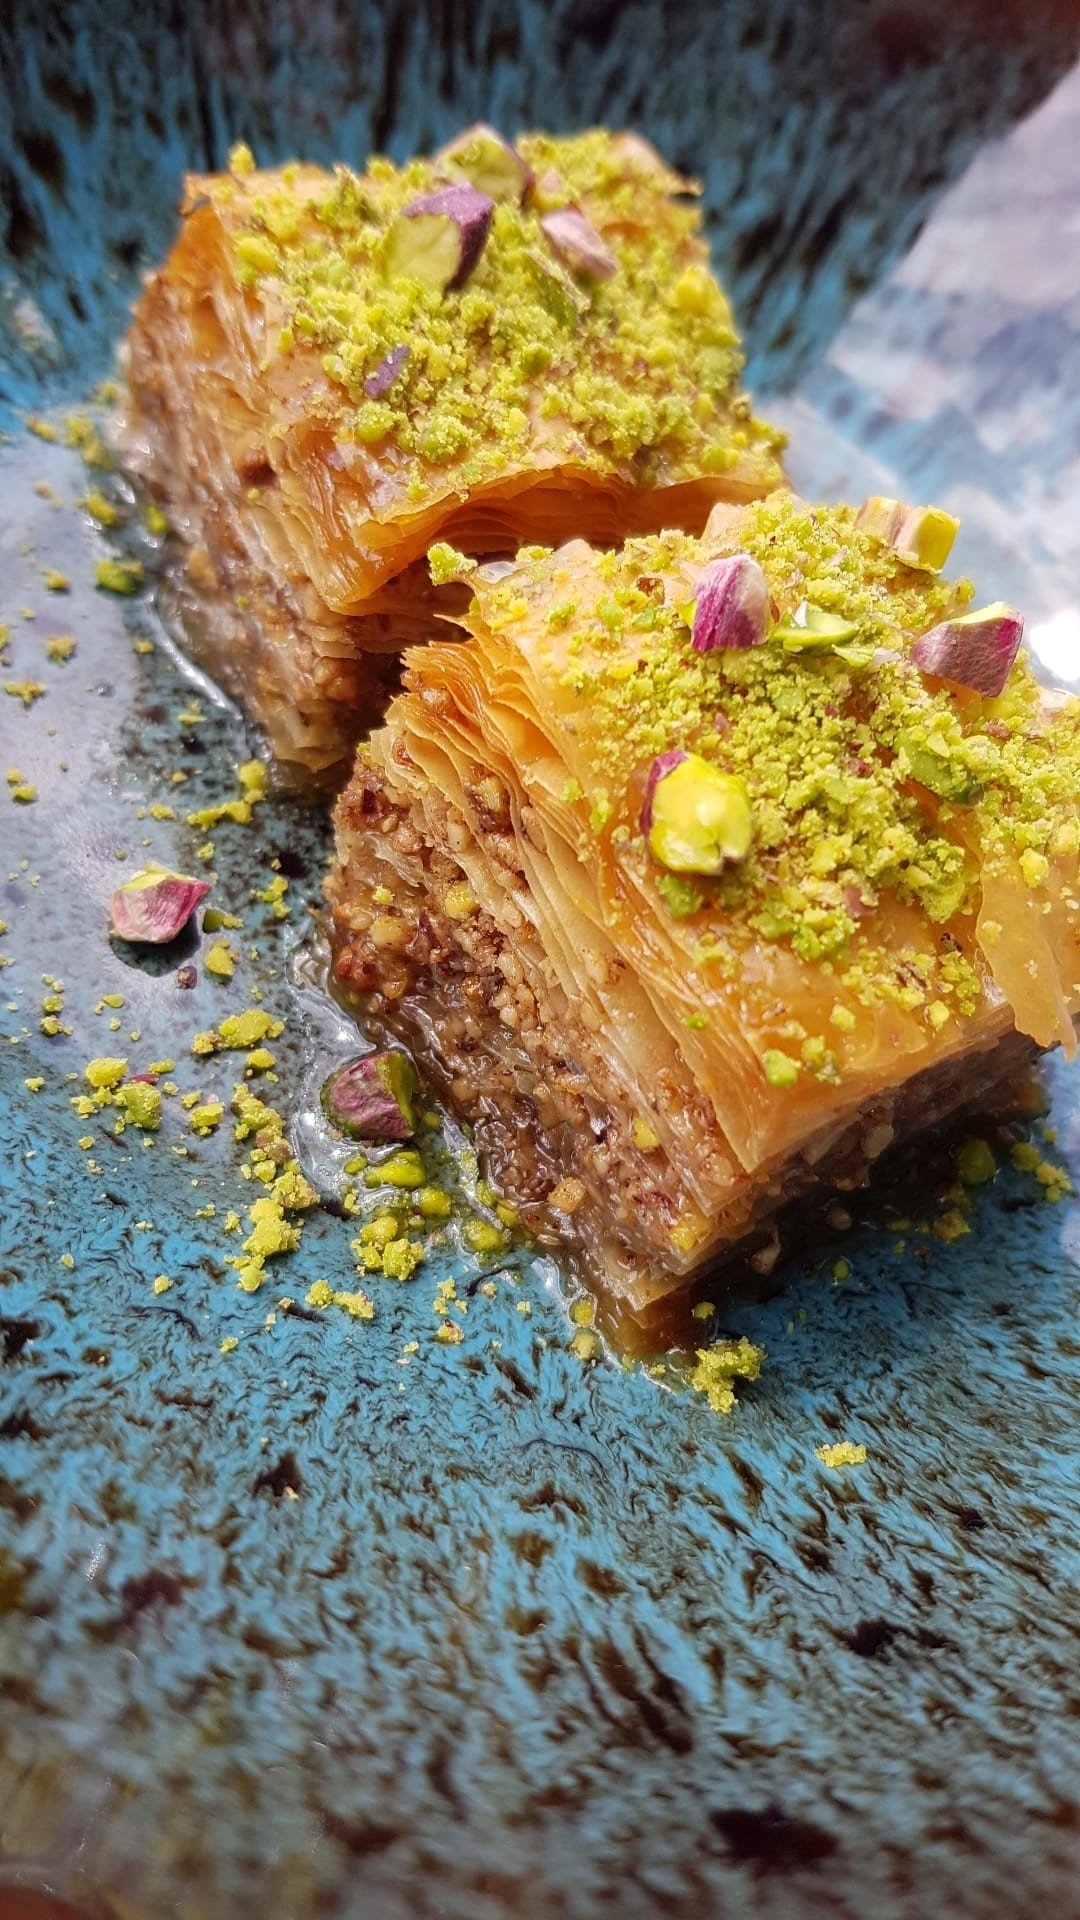 Baklava: Served with a dusting of powdered sugar or a sprinkling of ground cinnamon. 1080x1920 Full HD Wallpaper.